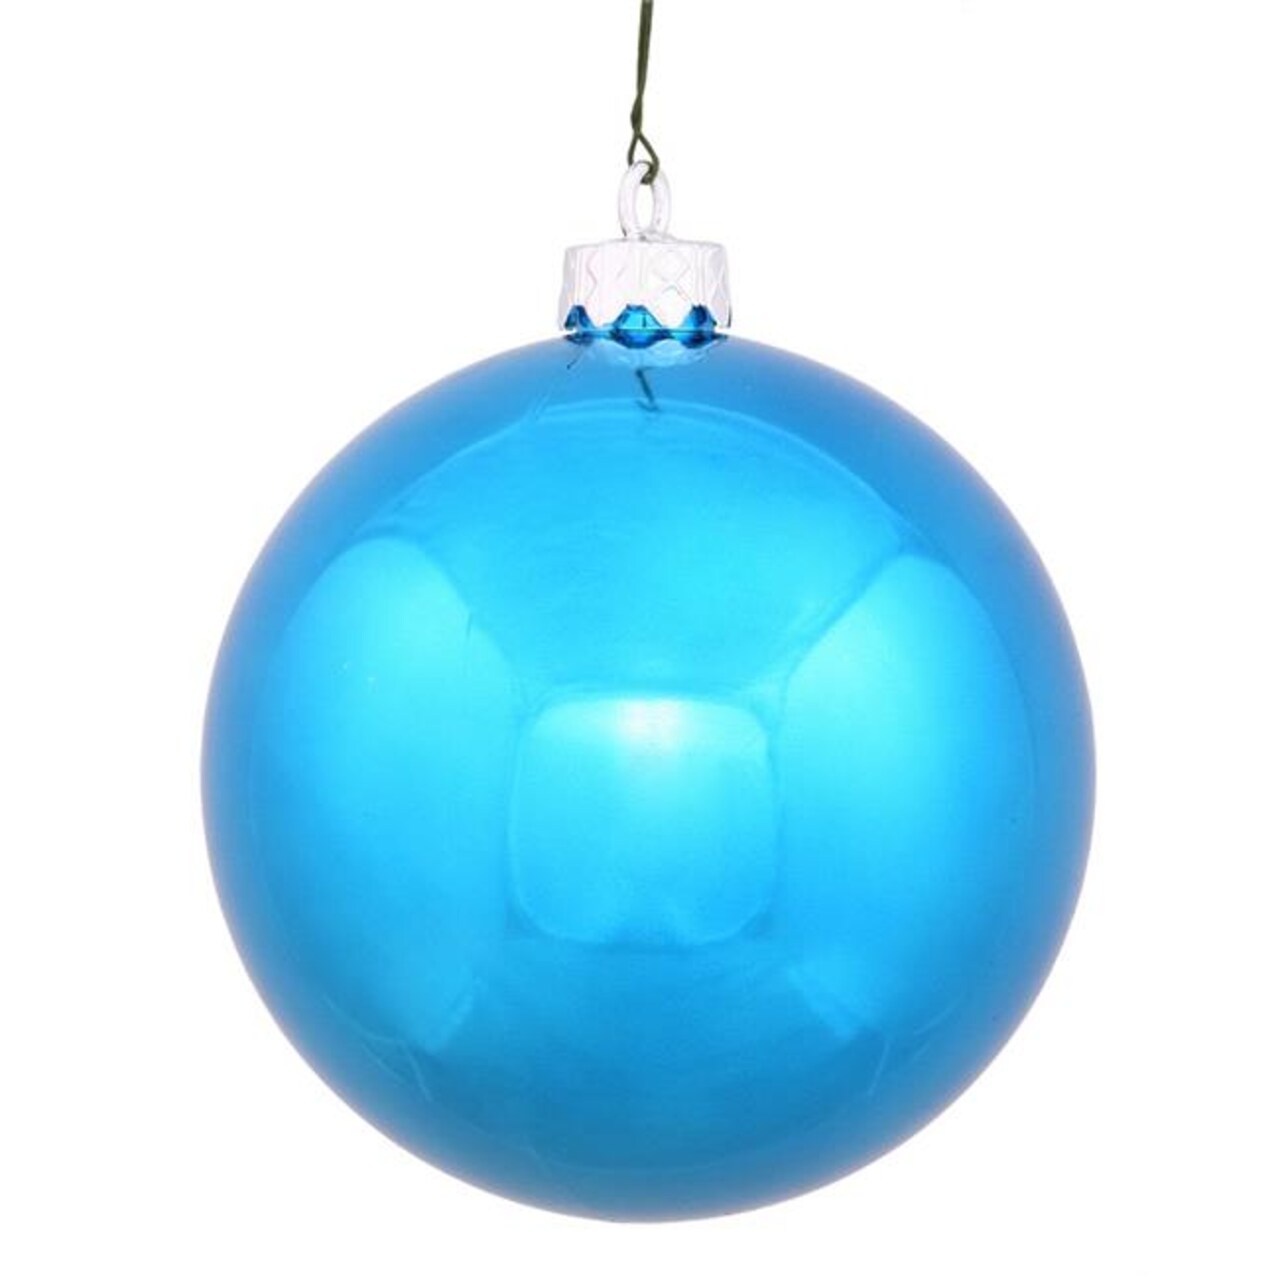 Turquoise Shiny UV Drilled Ball Ornament, 2.75 in. - 12 per Bag